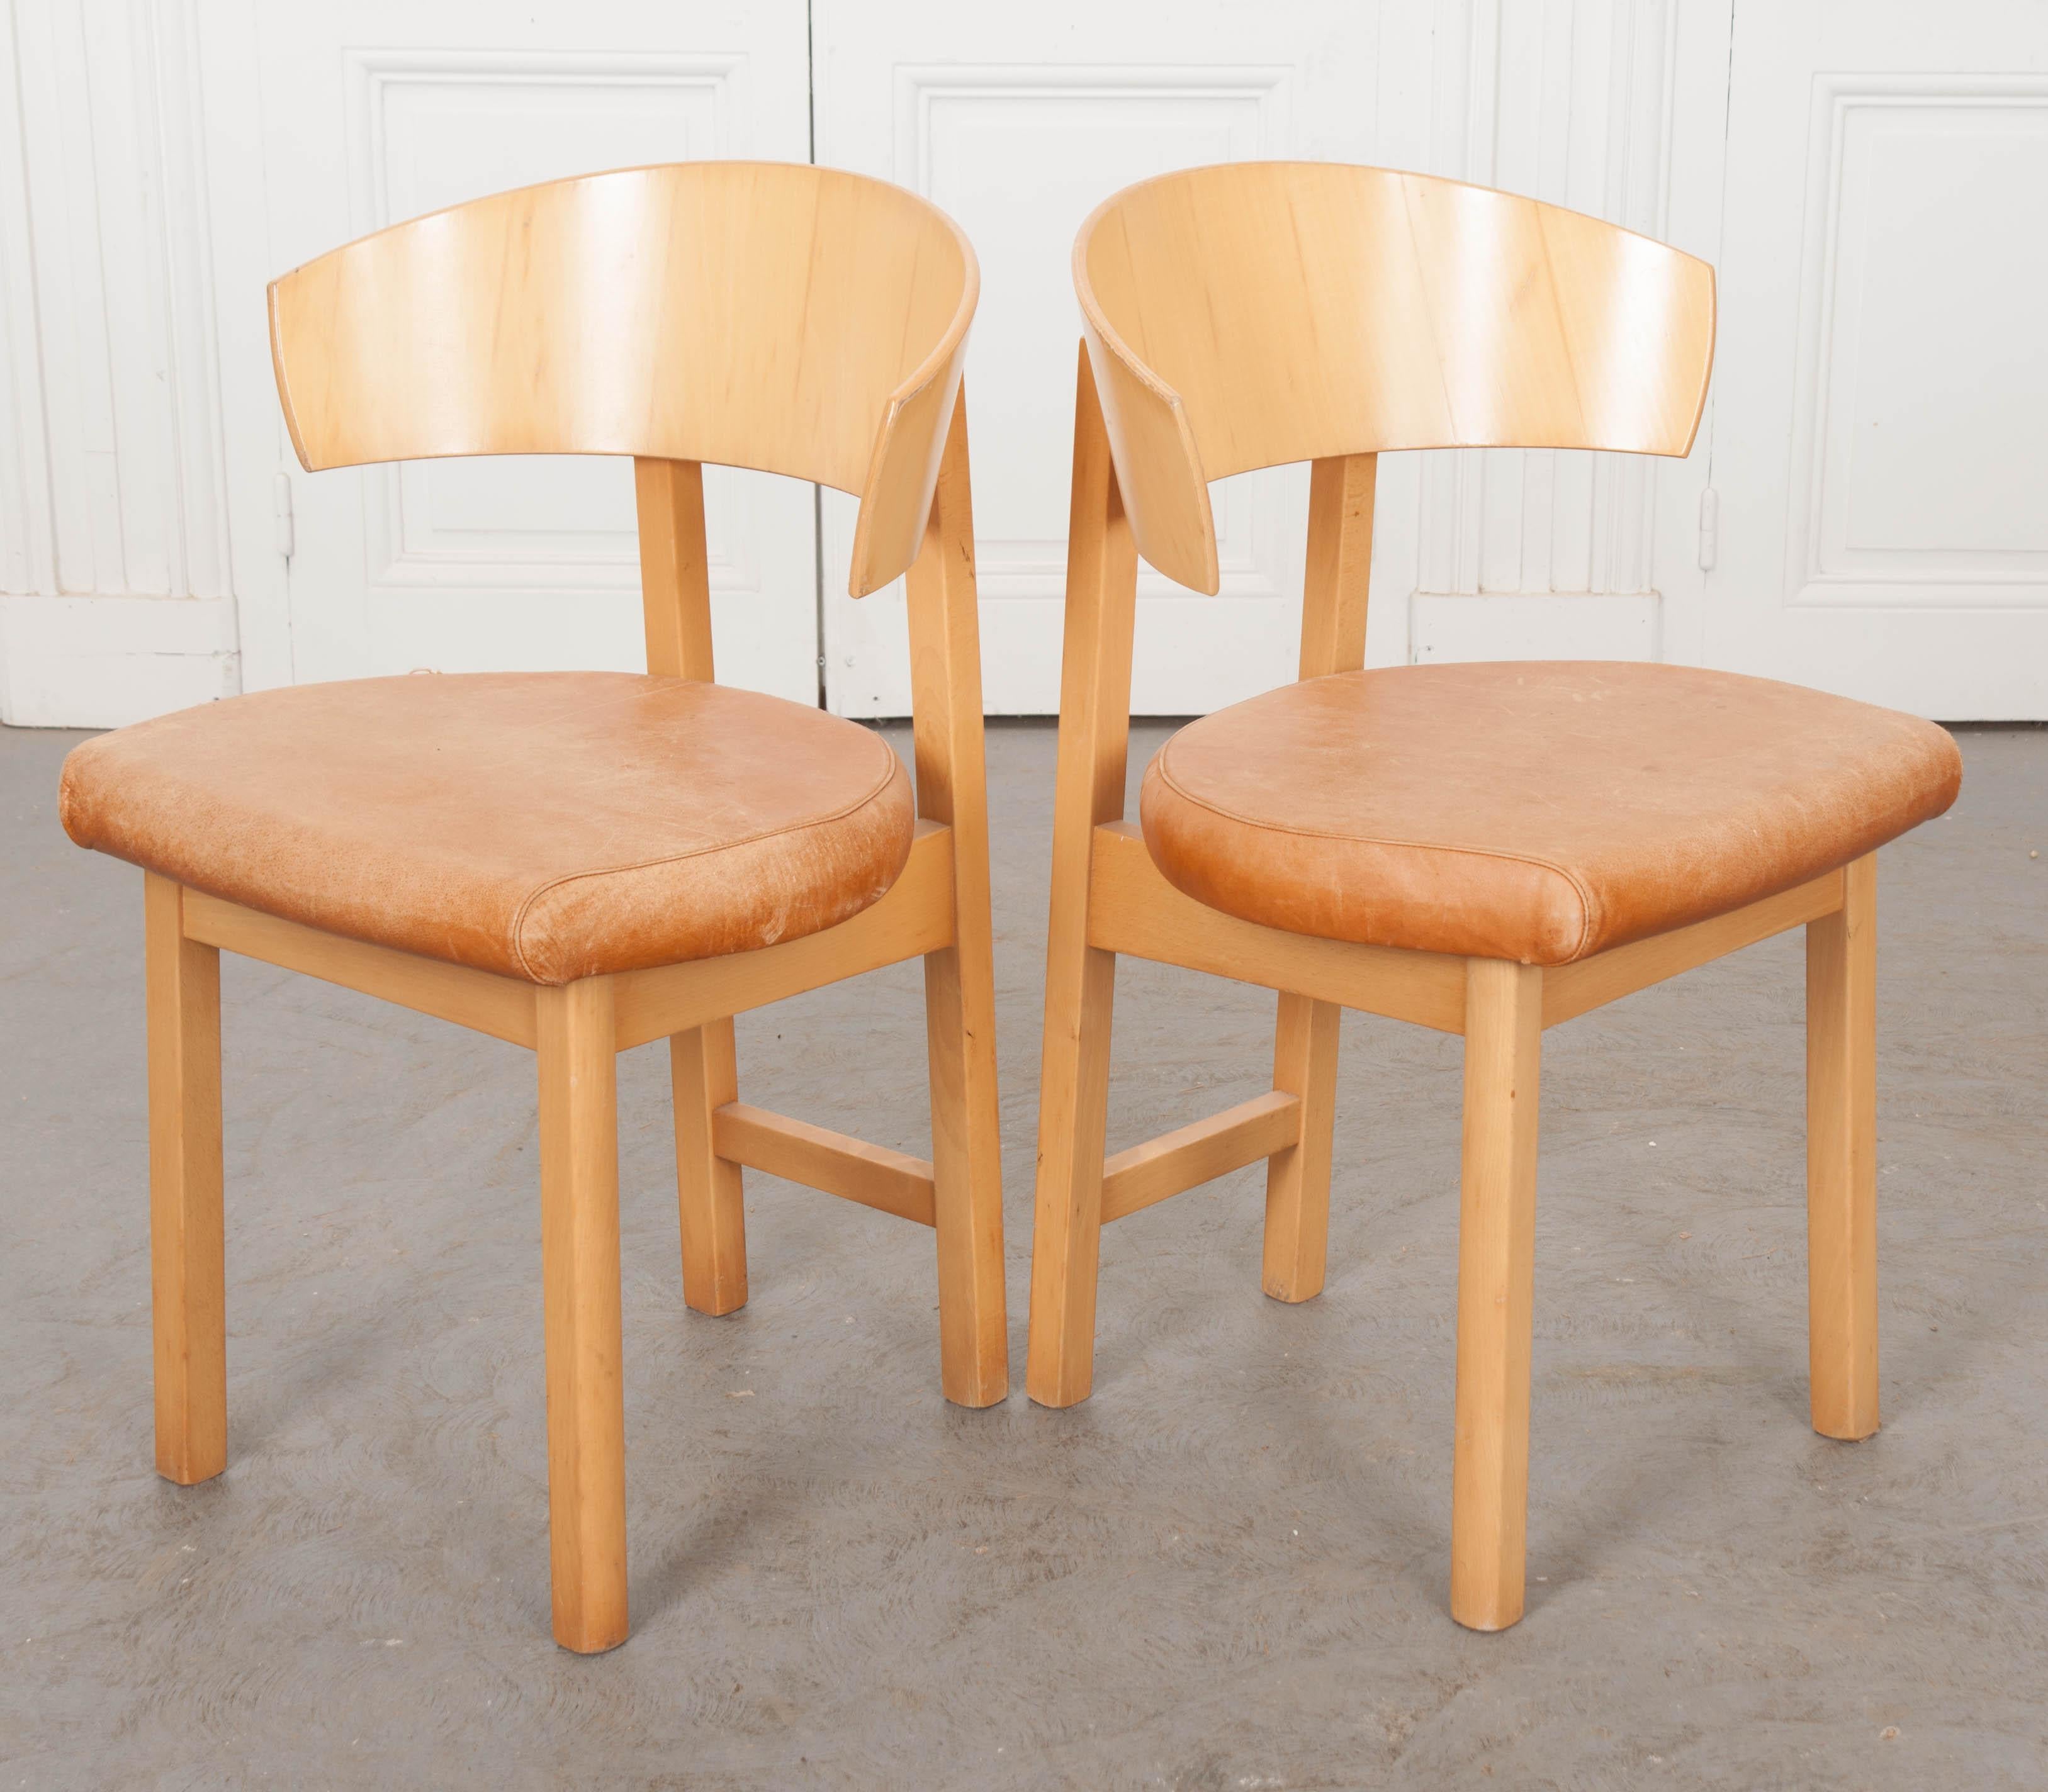 20th Century Pair of French Vintage Art Deco-Style Side Chairs